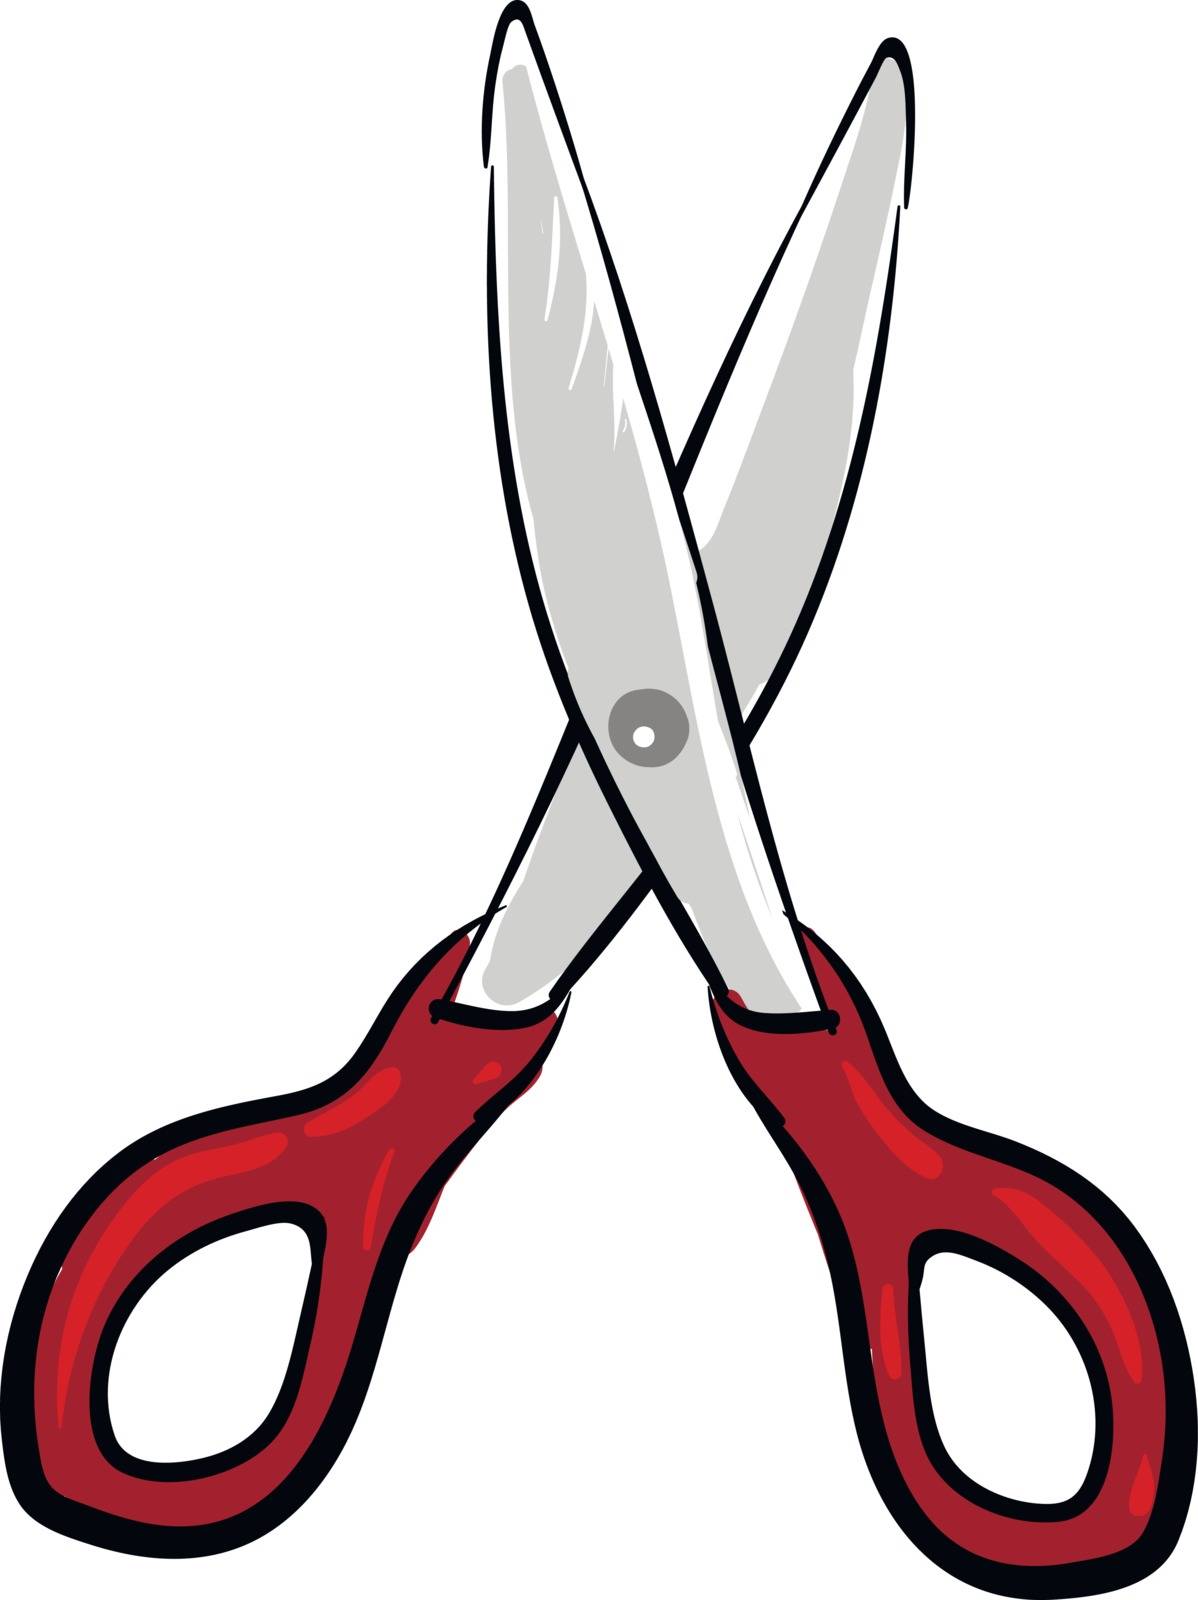 A pair of scissors with red handles and shiny blades, vector, color drawing or illustration. 